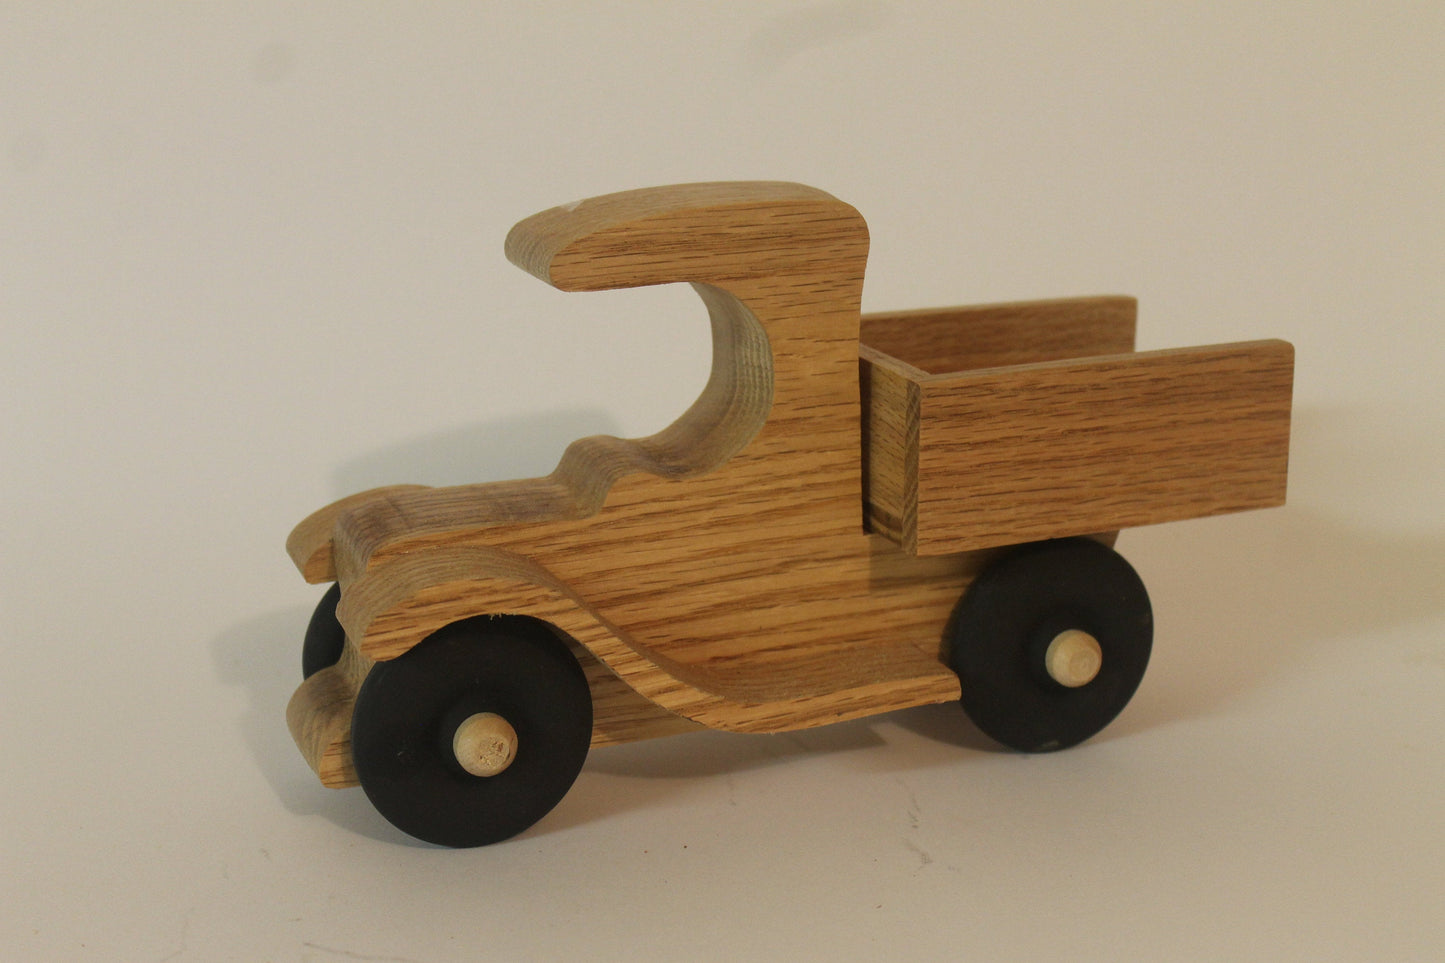 Toy wood pickup truck, handcrafted from solid oak